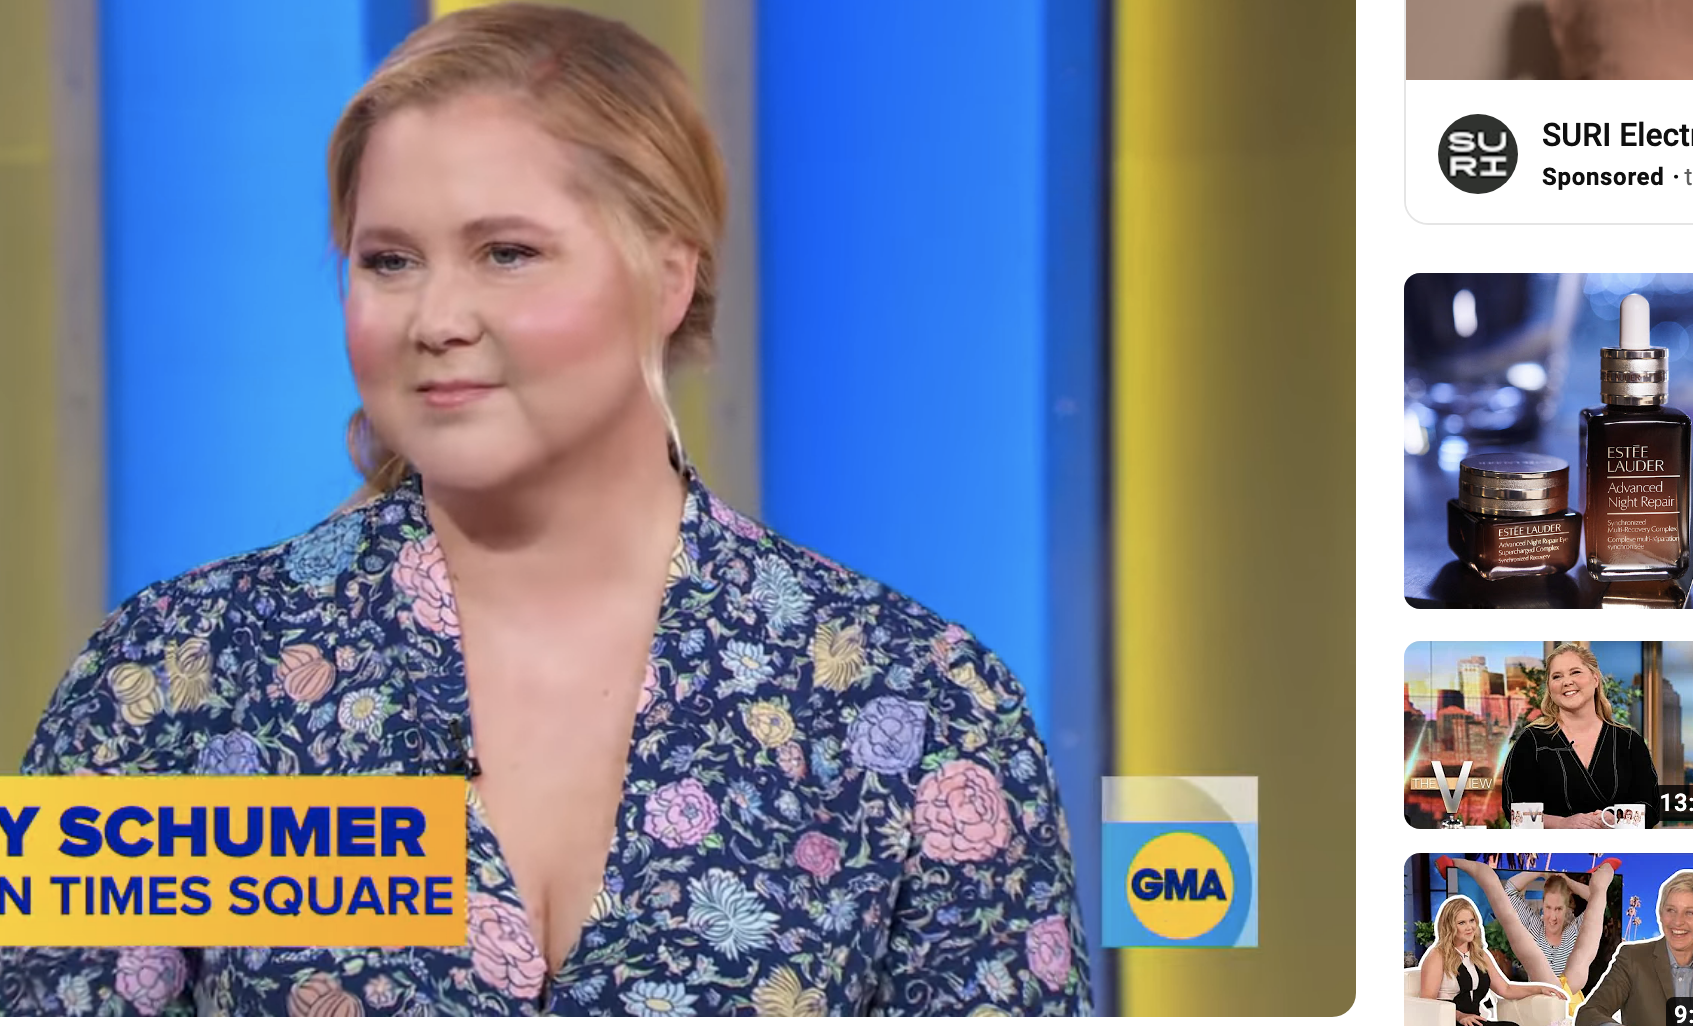 Amy wearing a floral top during a Good Morning America interview